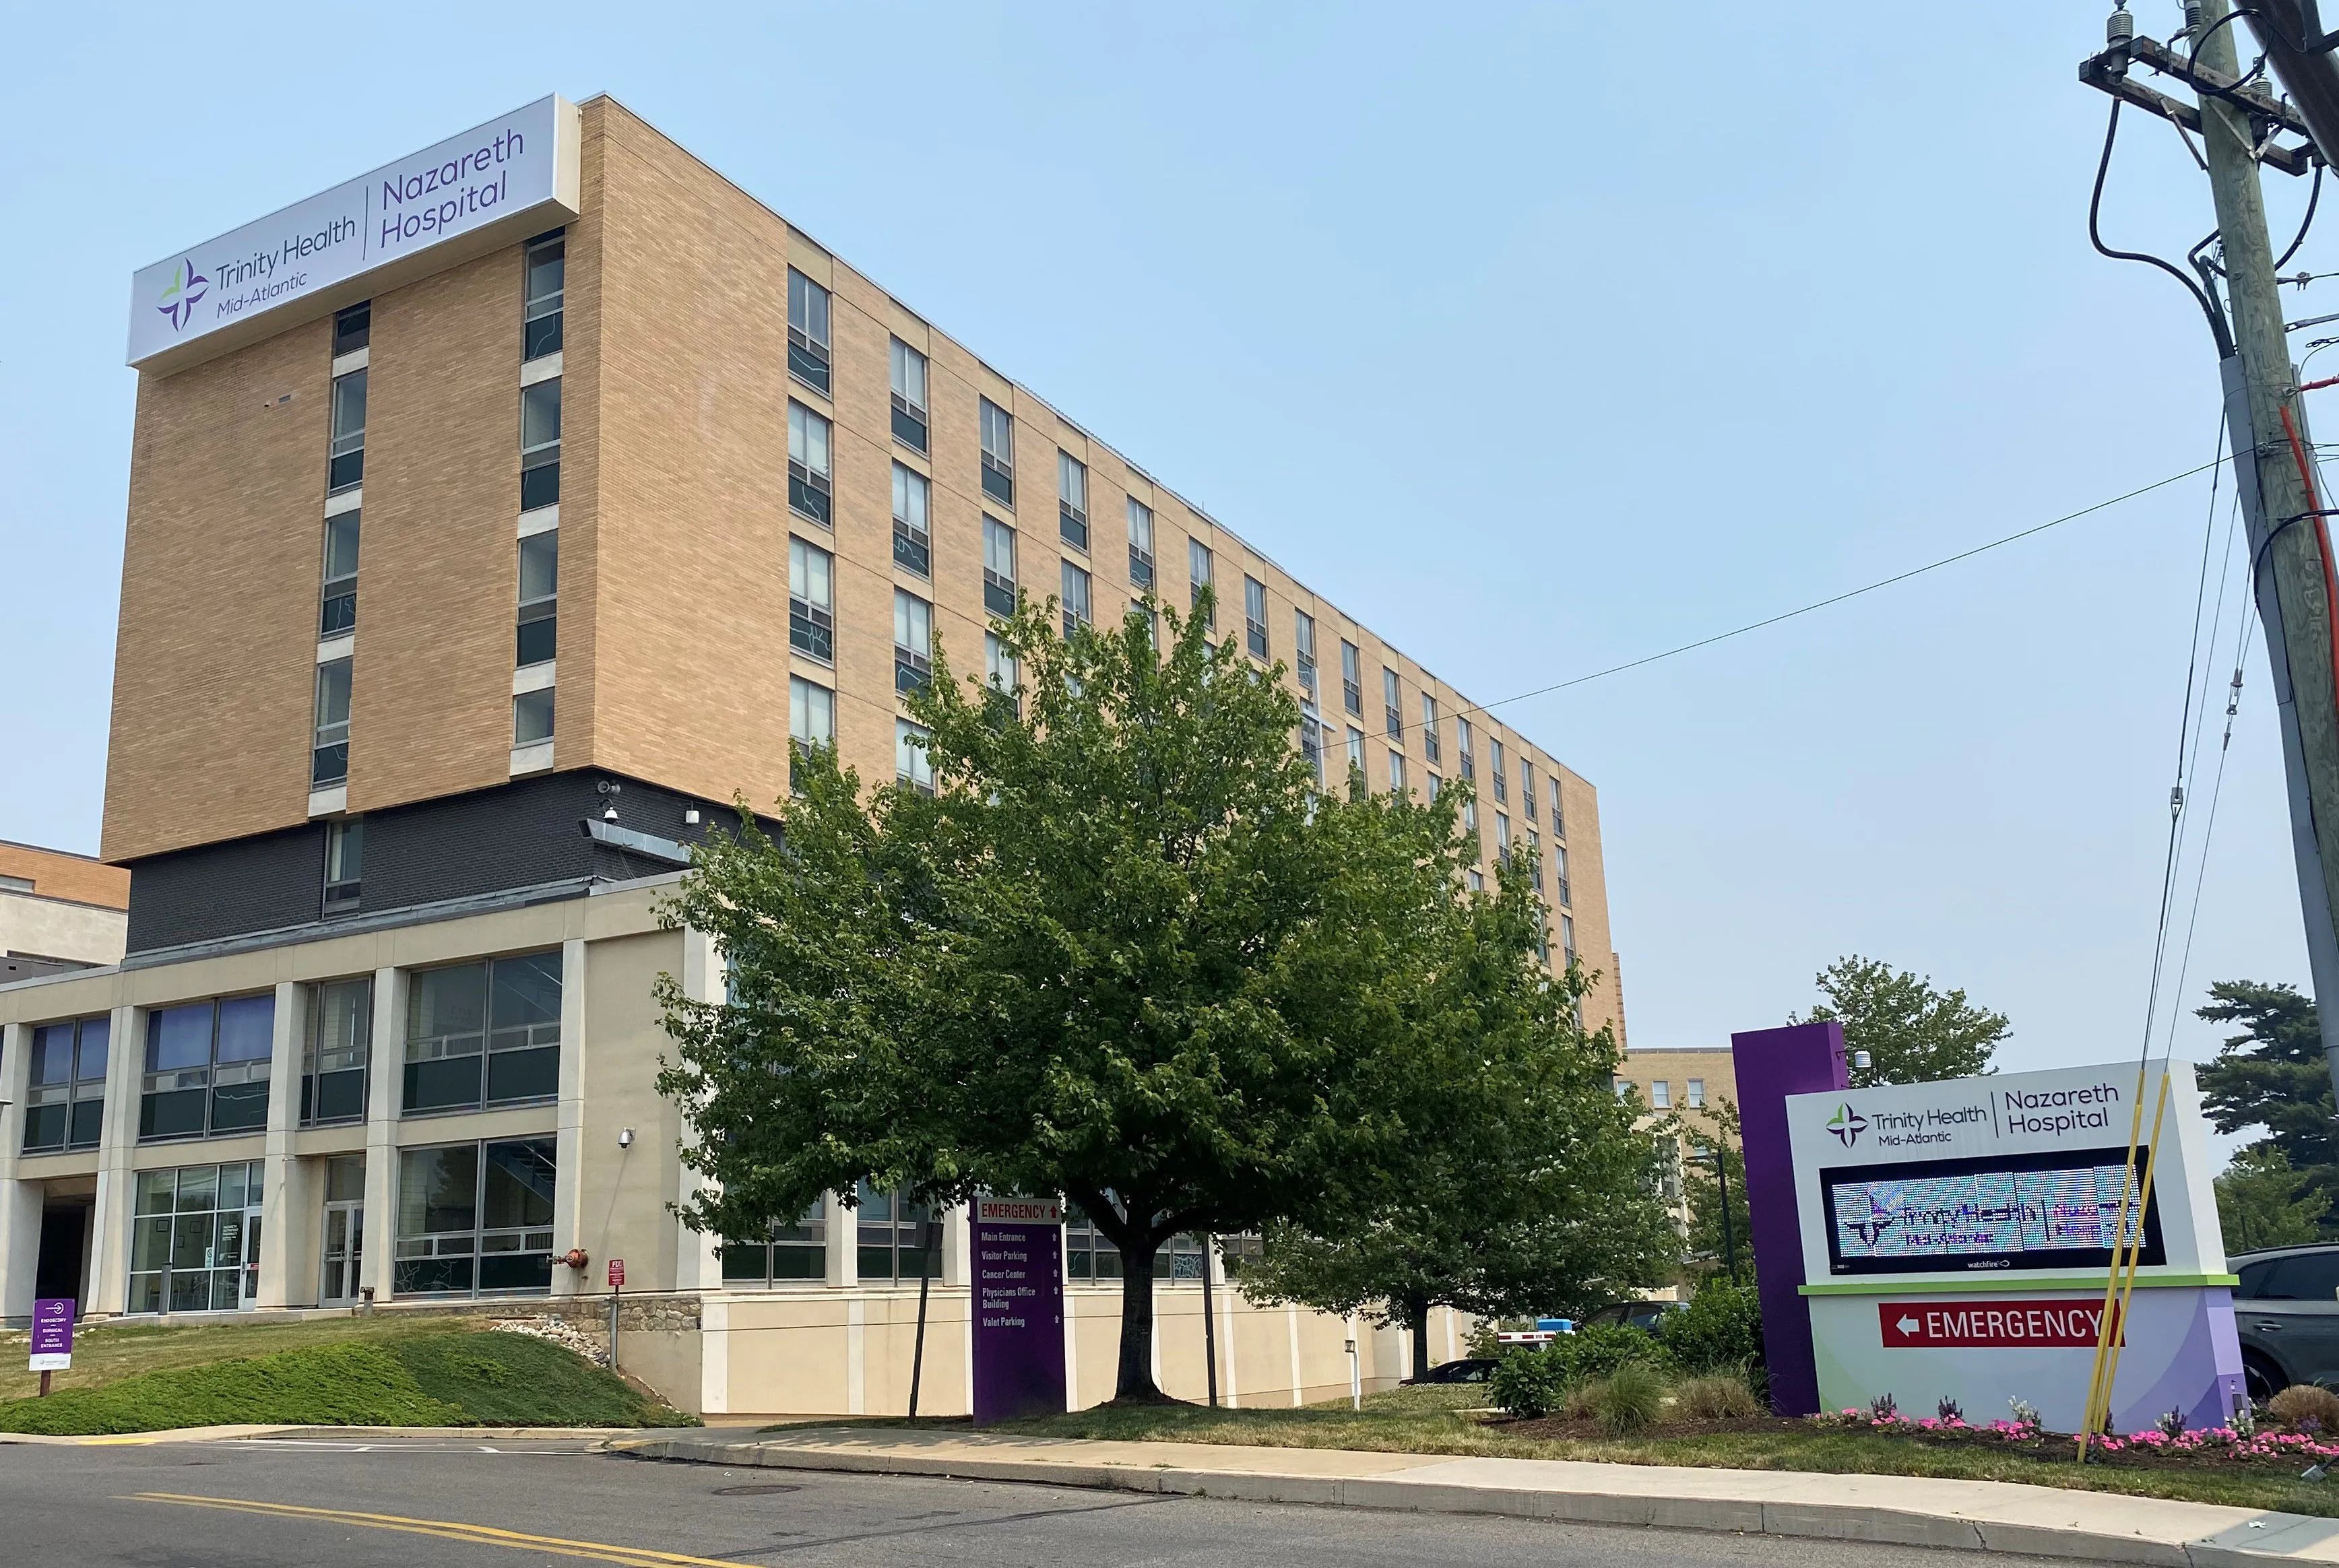 Nazareth Hospital in Northeast Philadelphia had the highest percentage of charity care as a percentage of expenses among hospitals in the Philadelphia region.